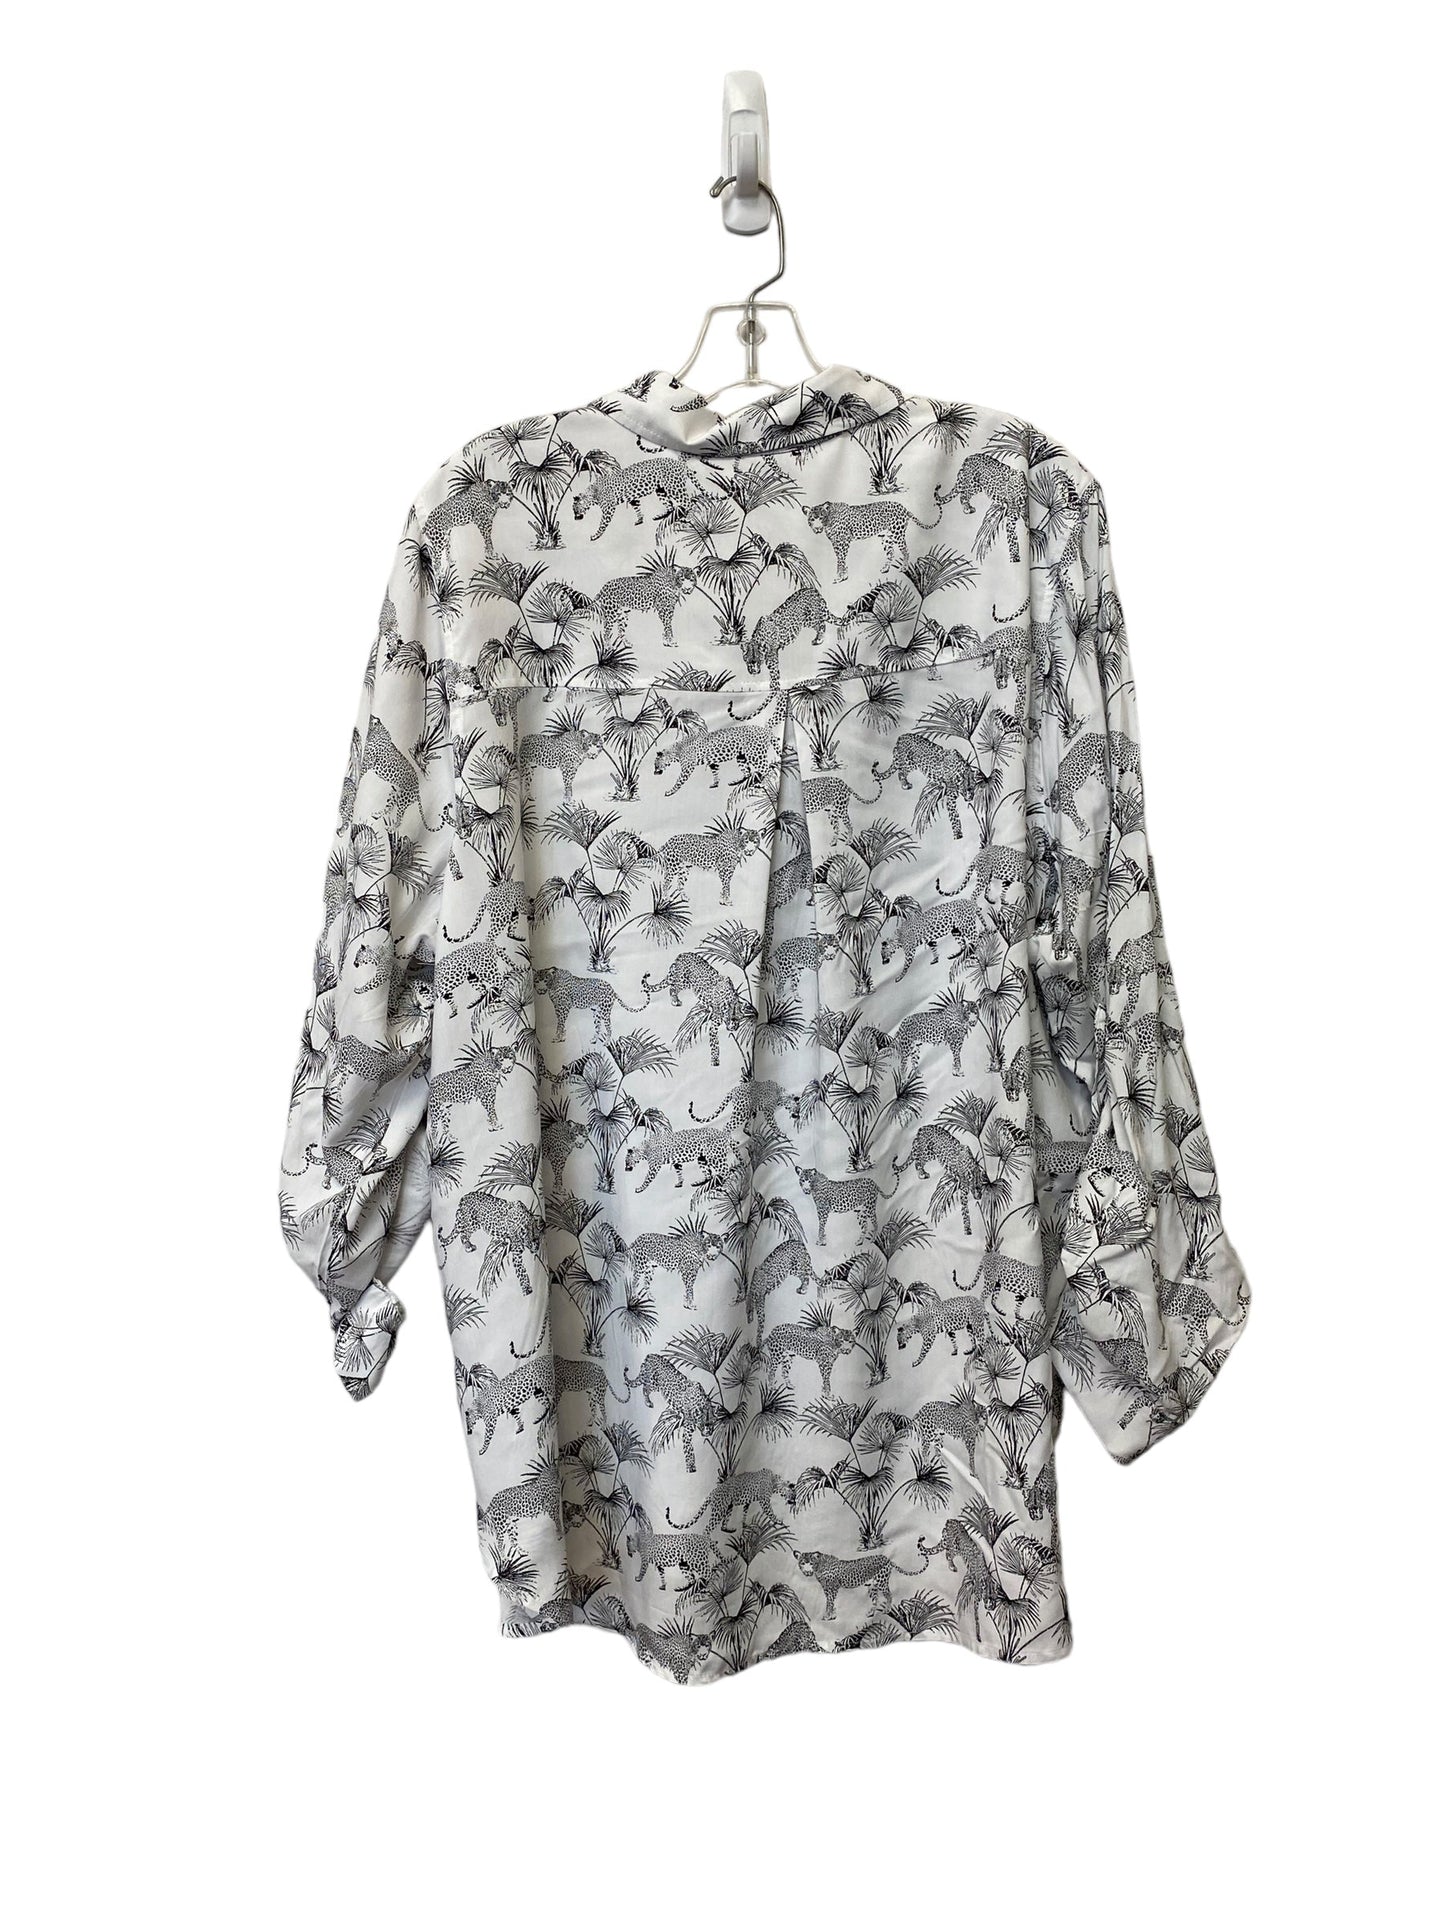 Animal Print Top Long Sleeve Jane And Delancey, Size 2x